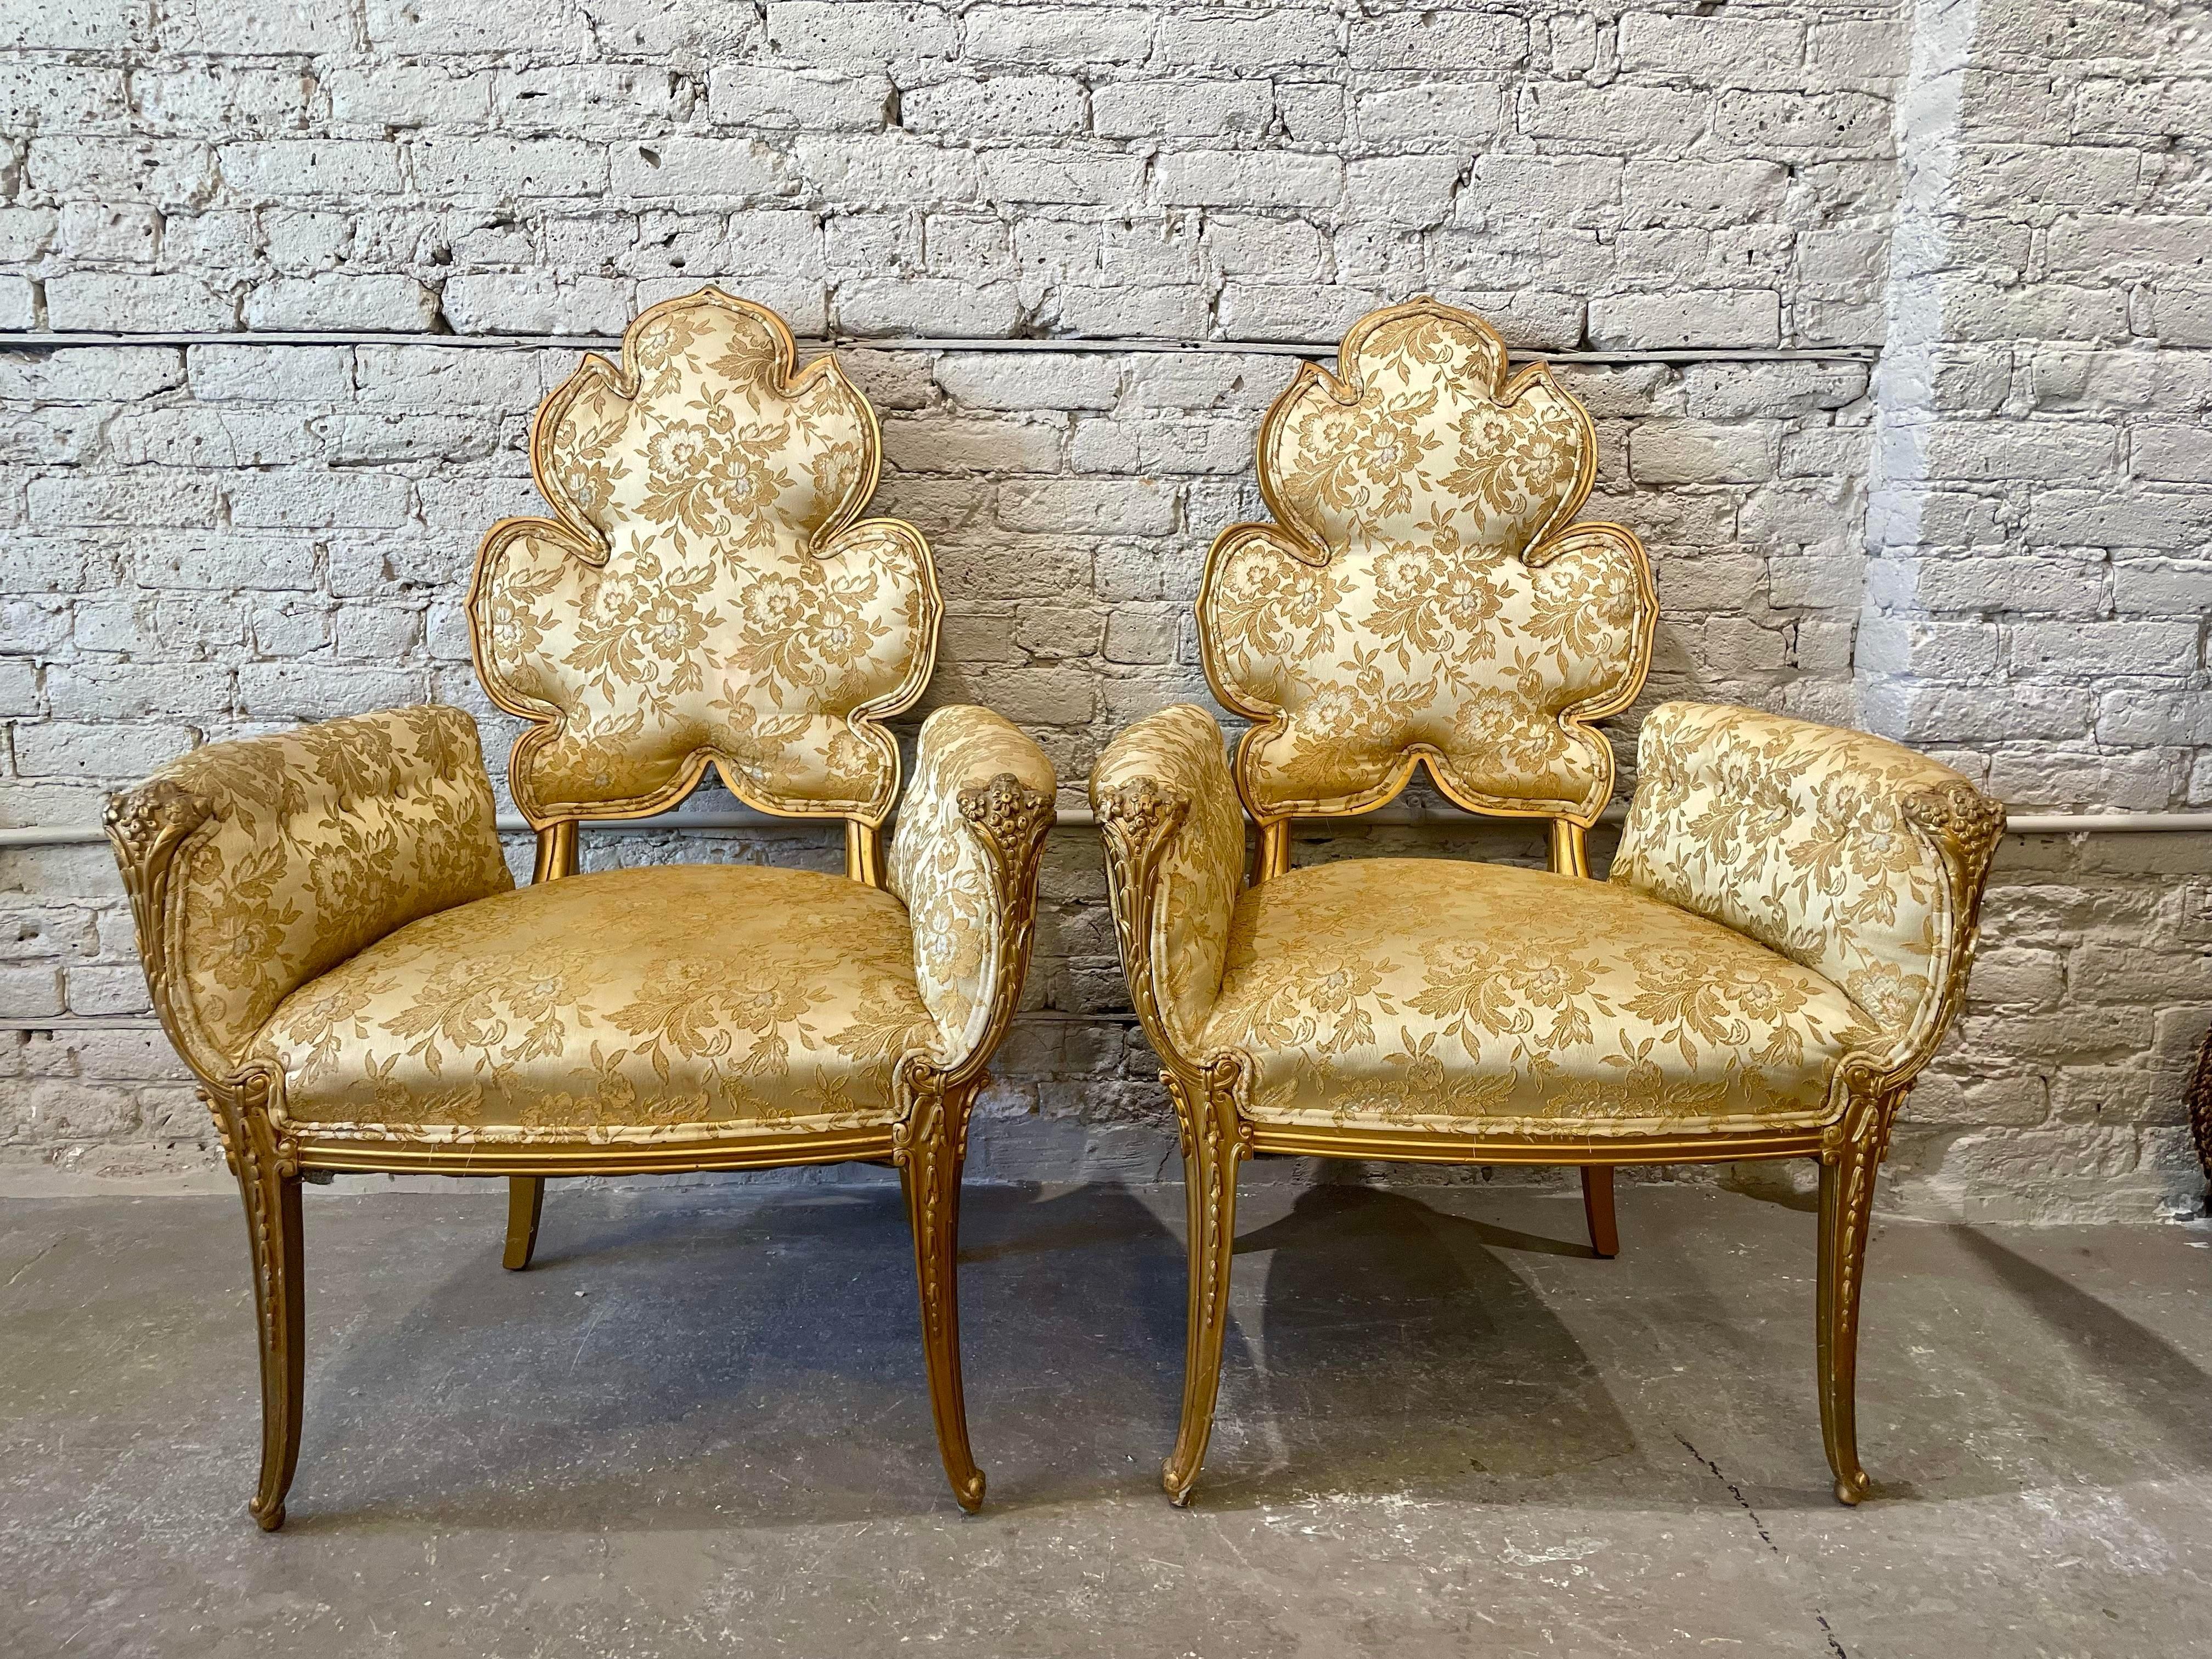 1940s Grosfeld House Leaf Flower Chairs - a Pair For Sale 5